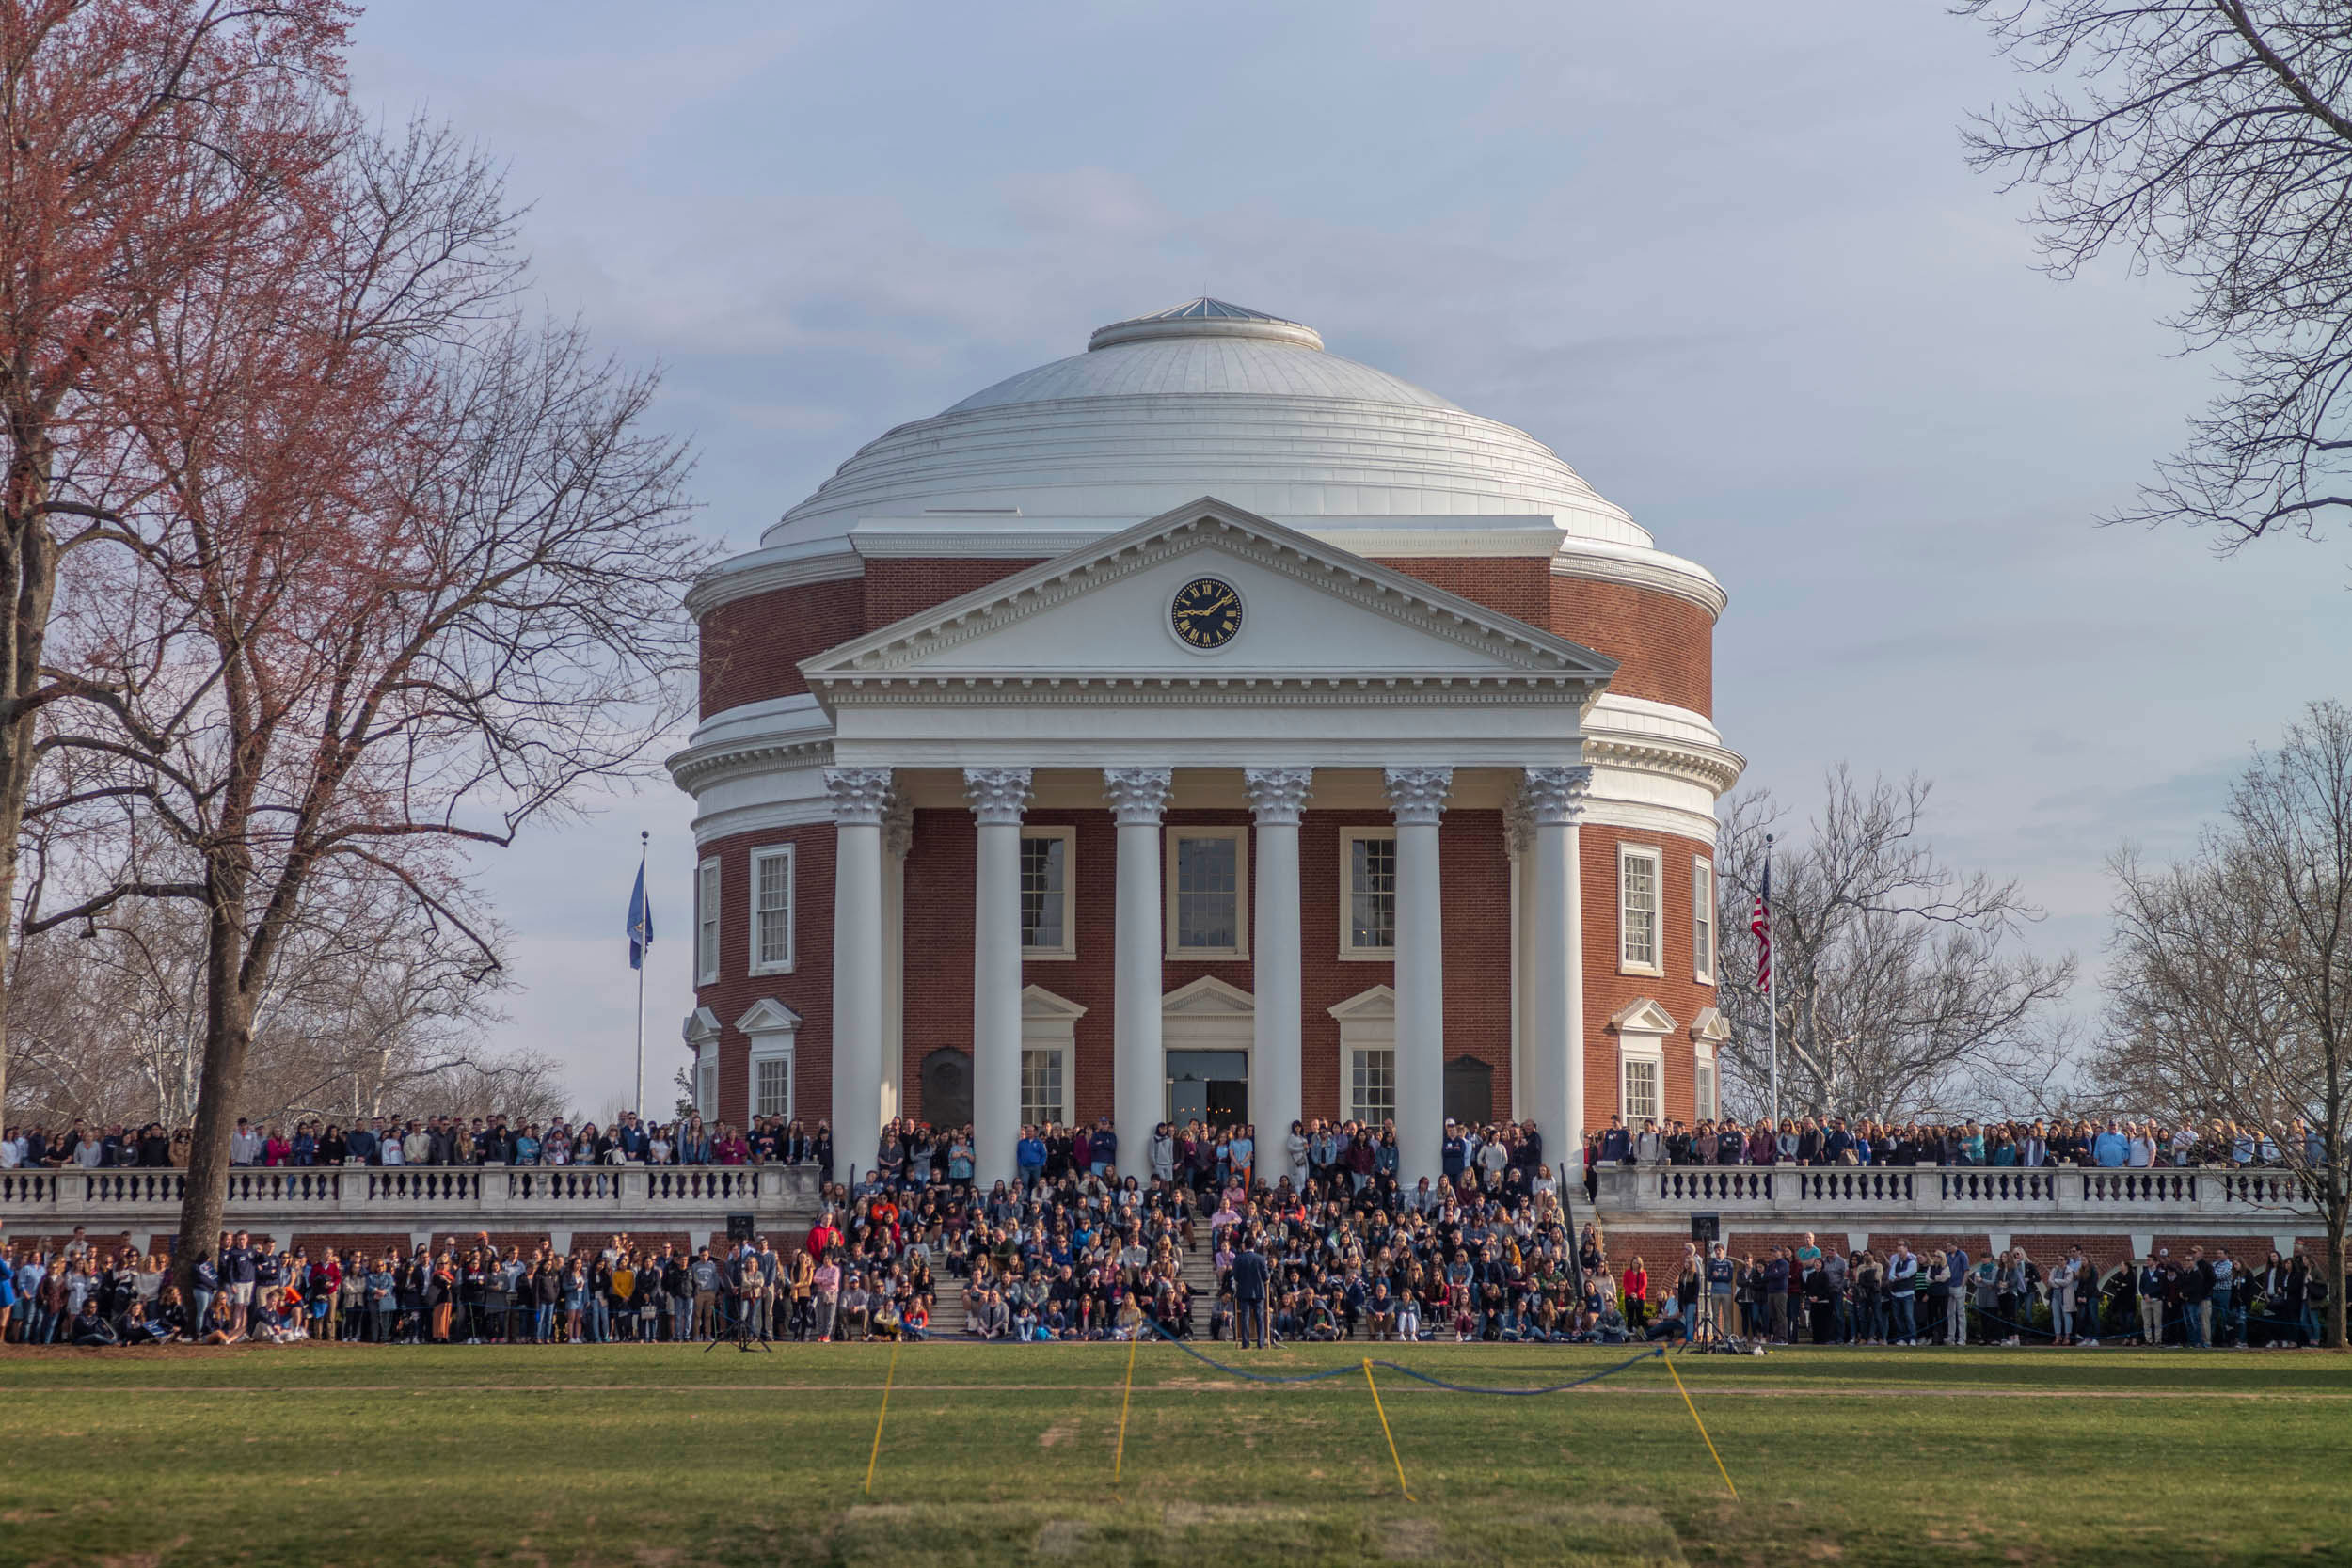 The Rotunda filled with people on its sidewalks and steps all pose together for a group photo